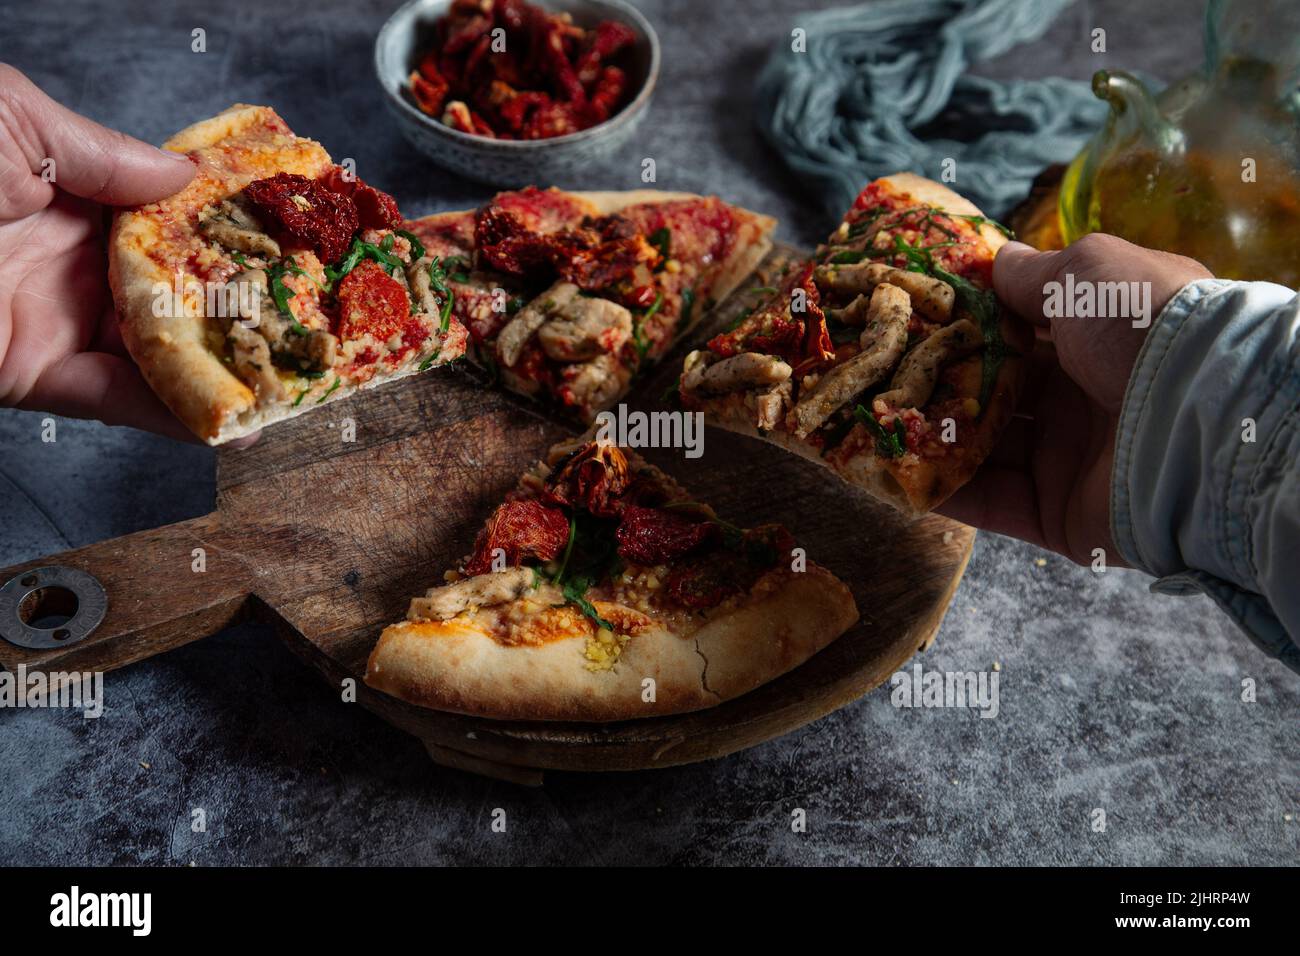 Diverse colleagues or friends take slices of vegan pizza and enjoy dinner. Stock Photo